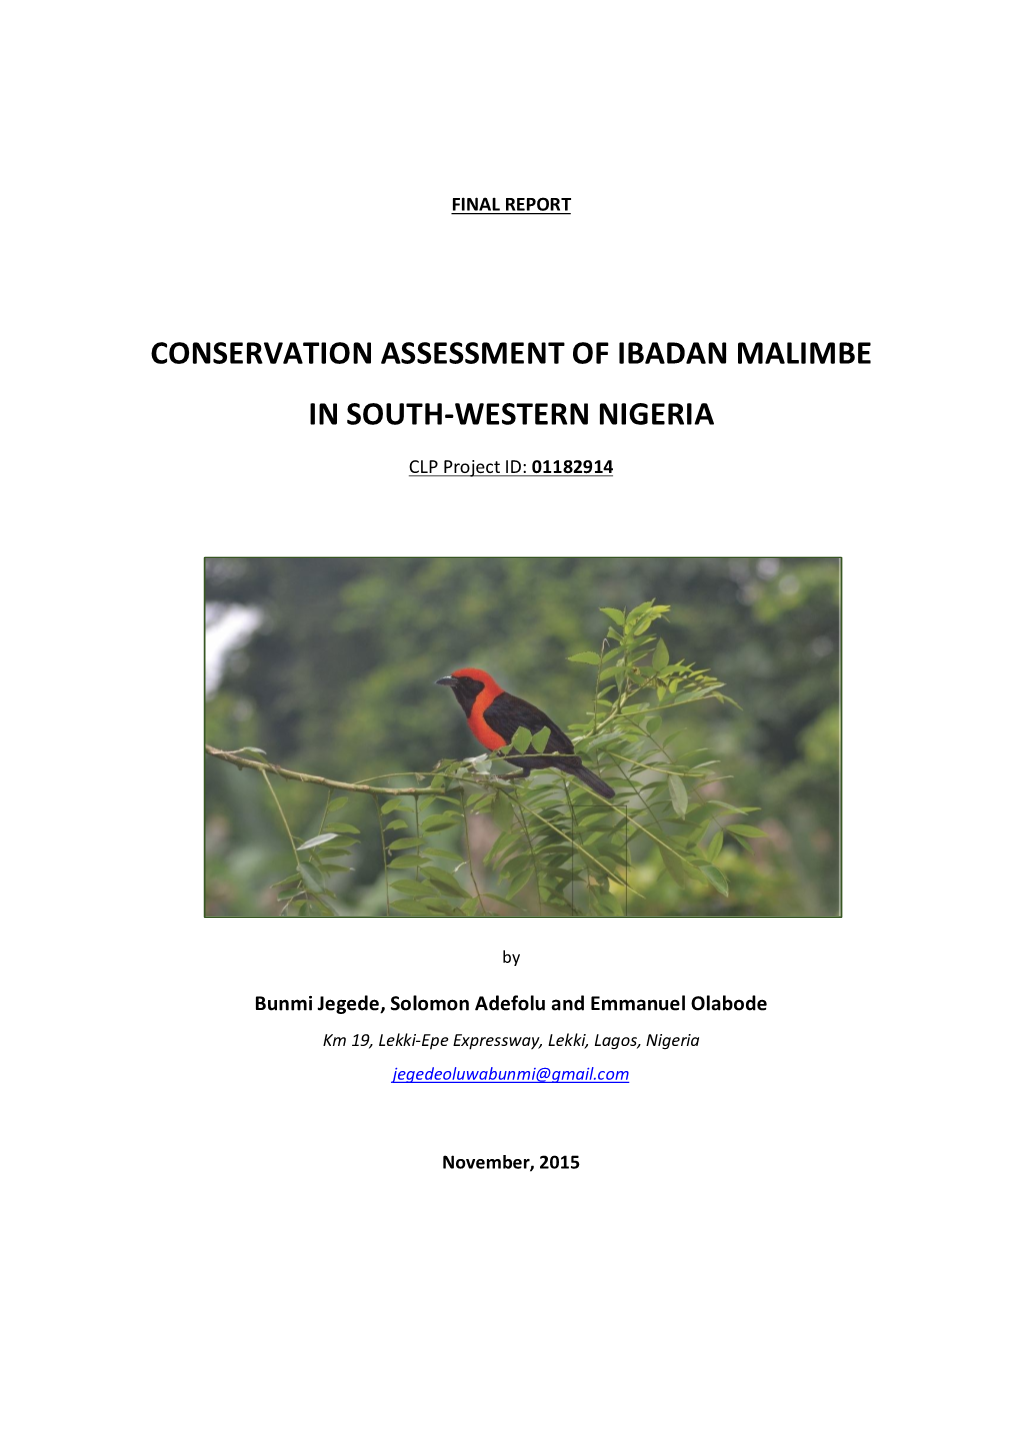 Conservation Assessment of Ibadan Malimbe in South-Western Nigeria